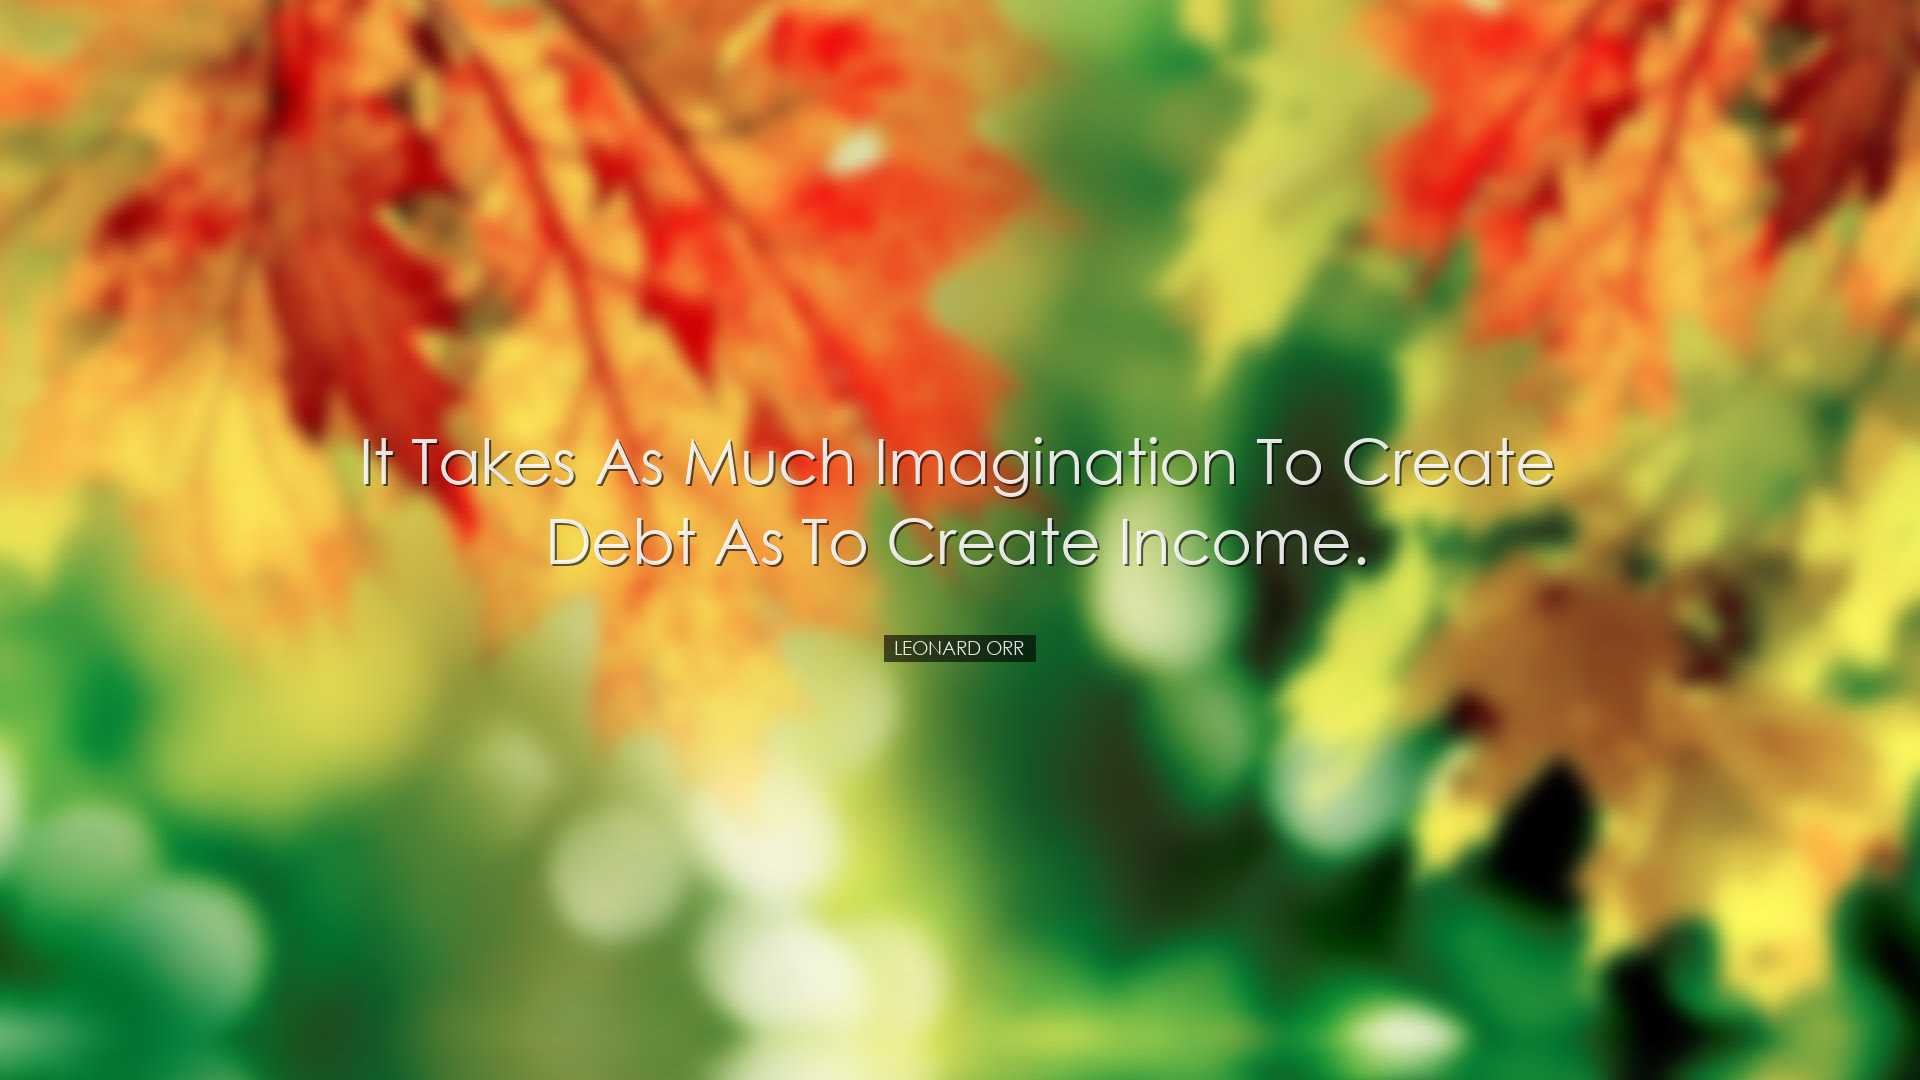 It takes as much imagination to create debt as to create income. -